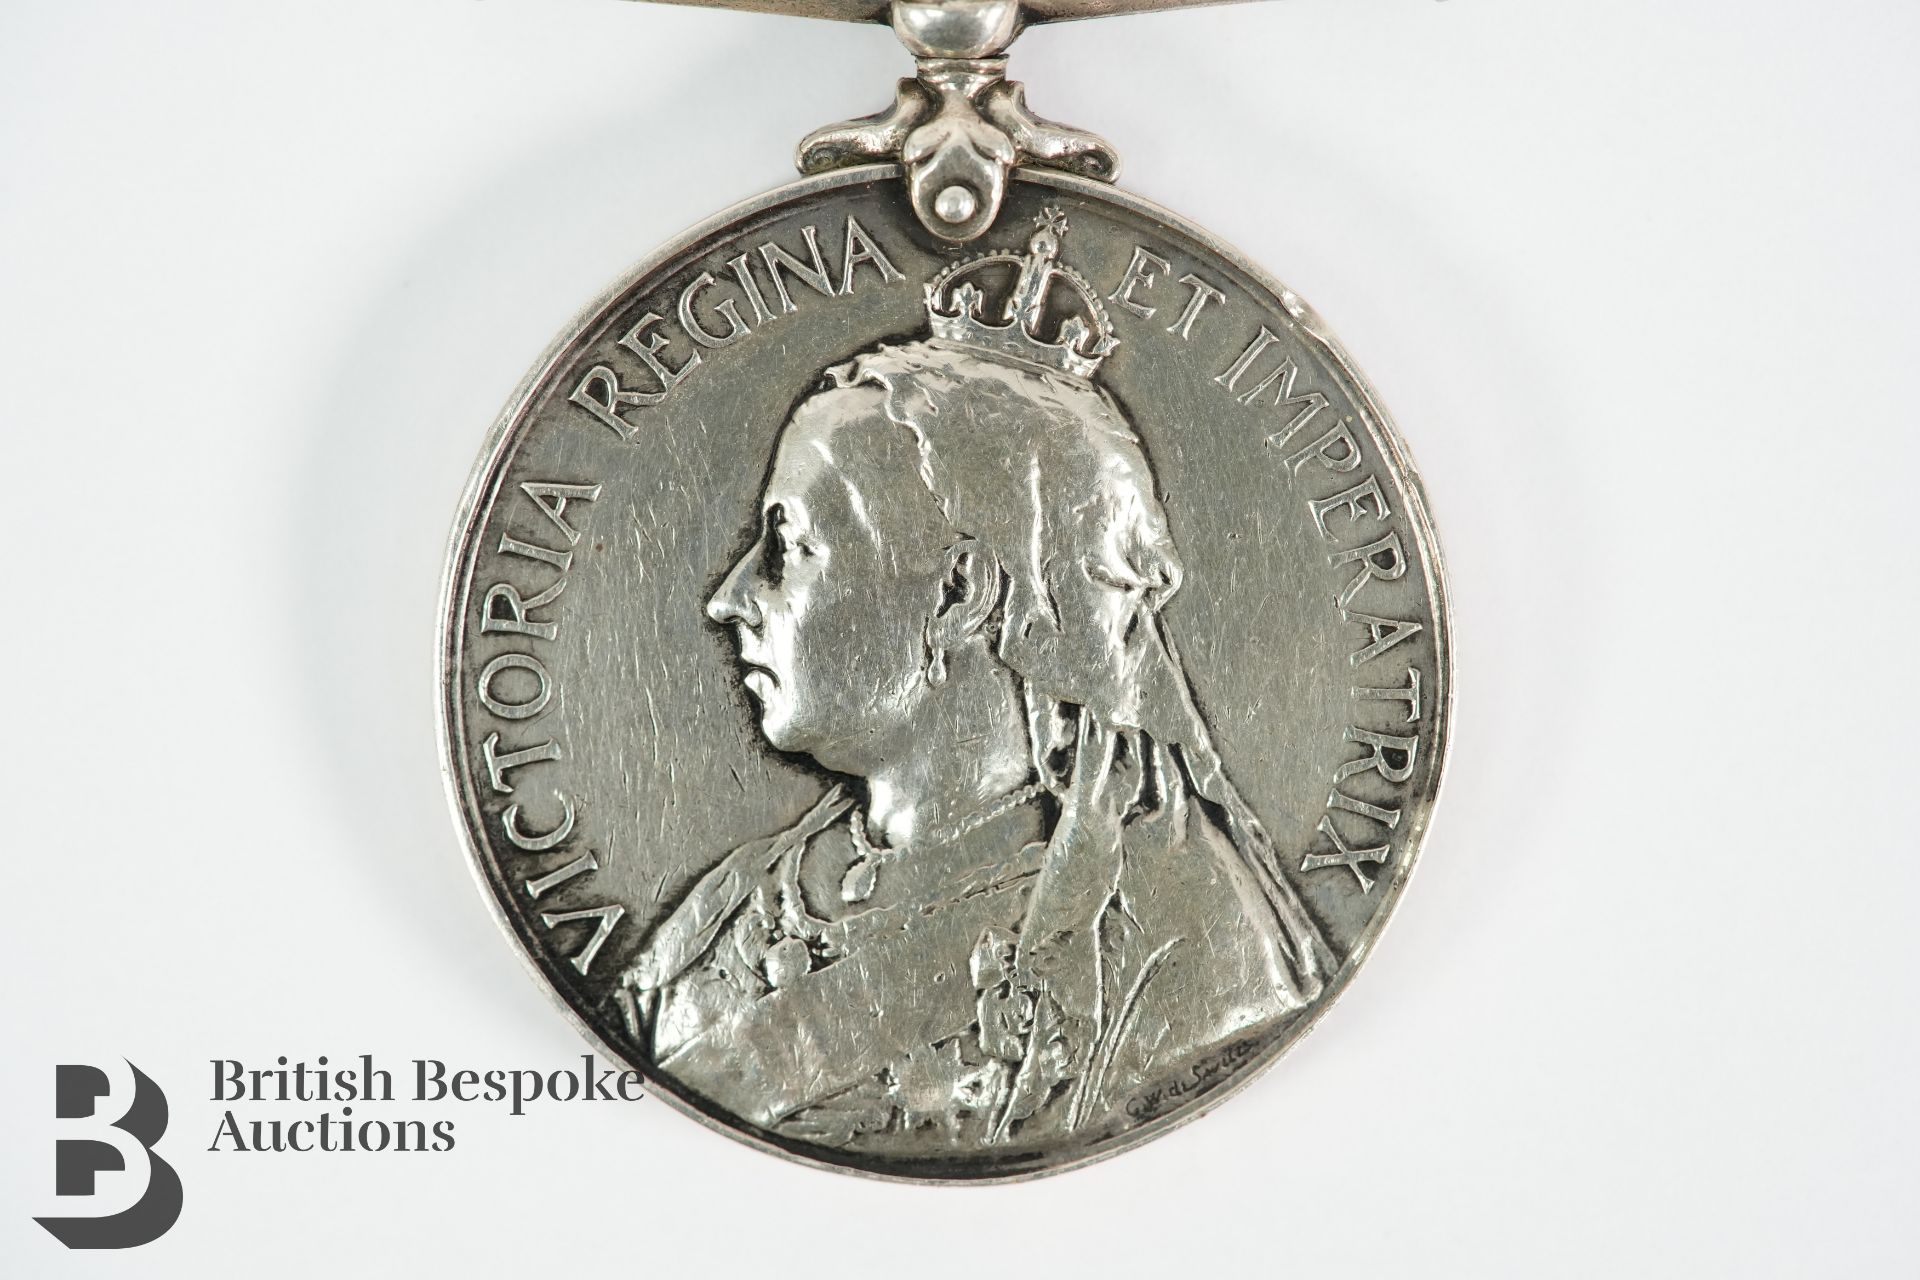 South Africa Campaign Medal - Image 2 of 4